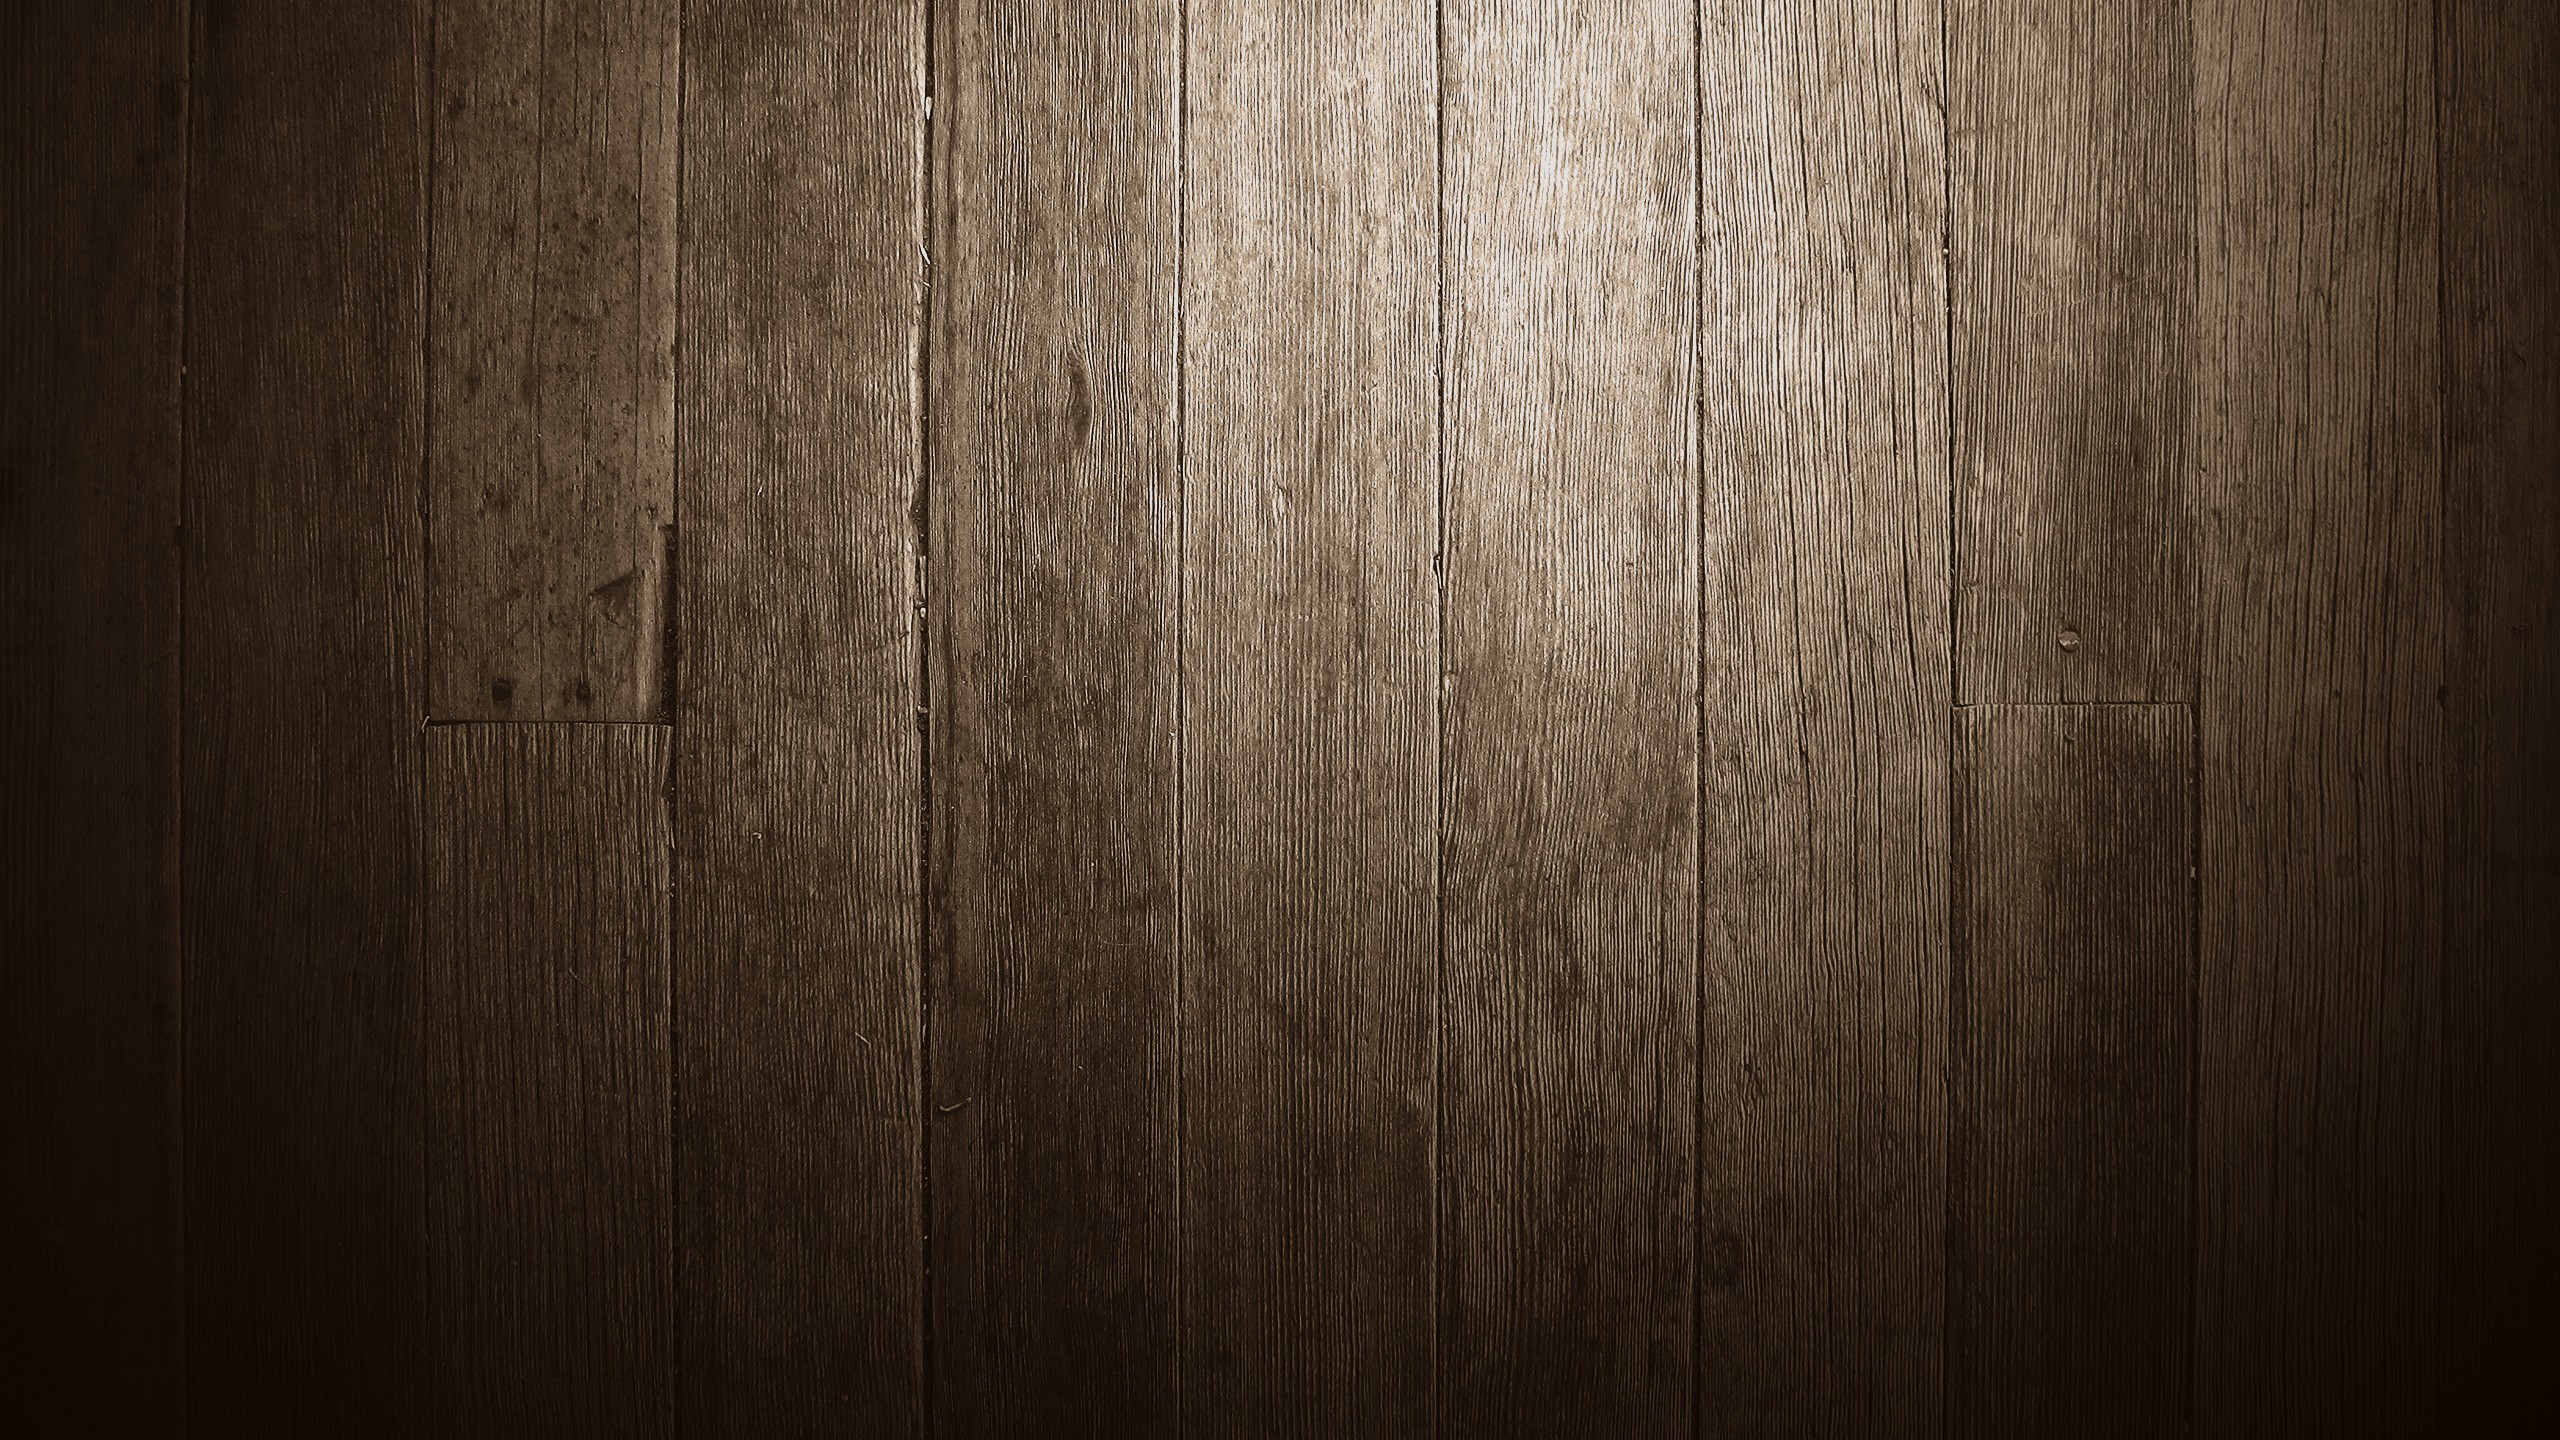 50 Hd Wood Wallpapers For Free Download